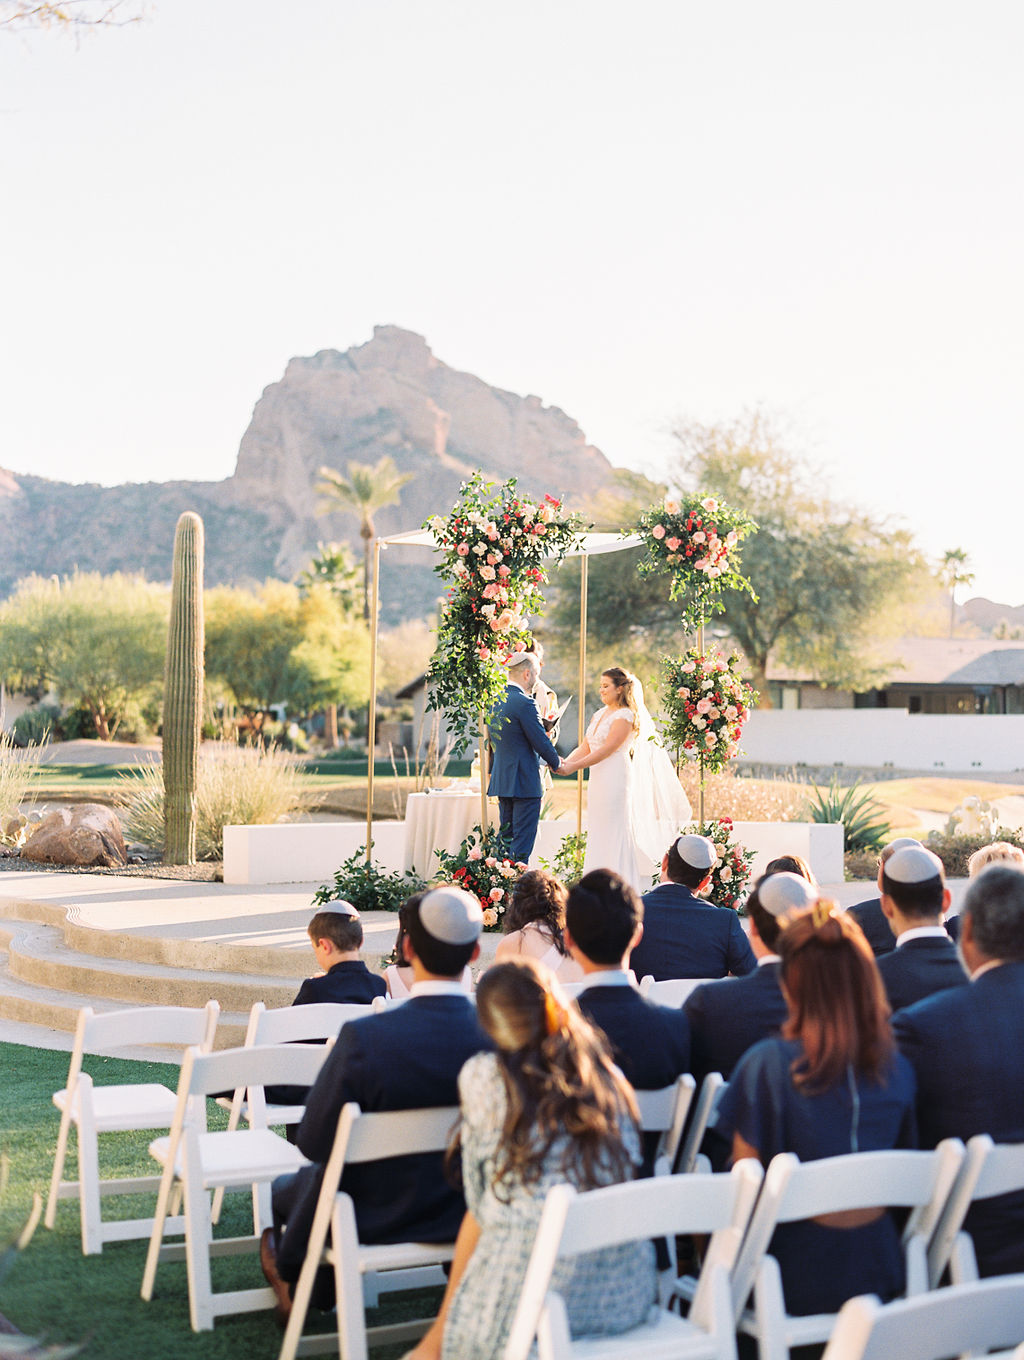 Bride and groom during outdoor wedding ceremony at Mountain Shadows in Arizona.